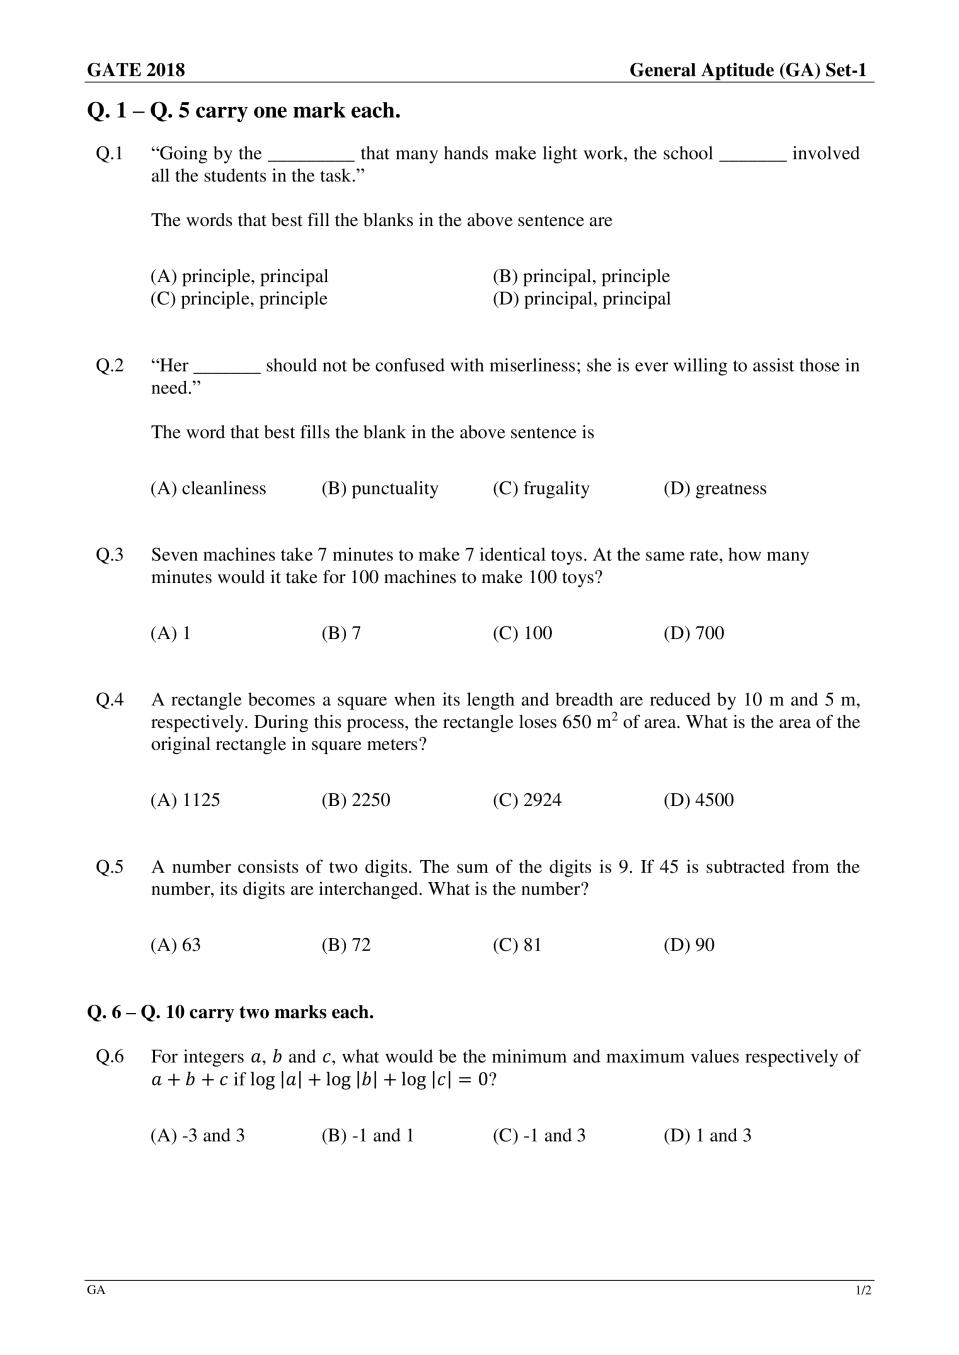 GATE 2018 Chemistry (COMPULSORY) (XL-P) Question Paper with Answer - Page 1